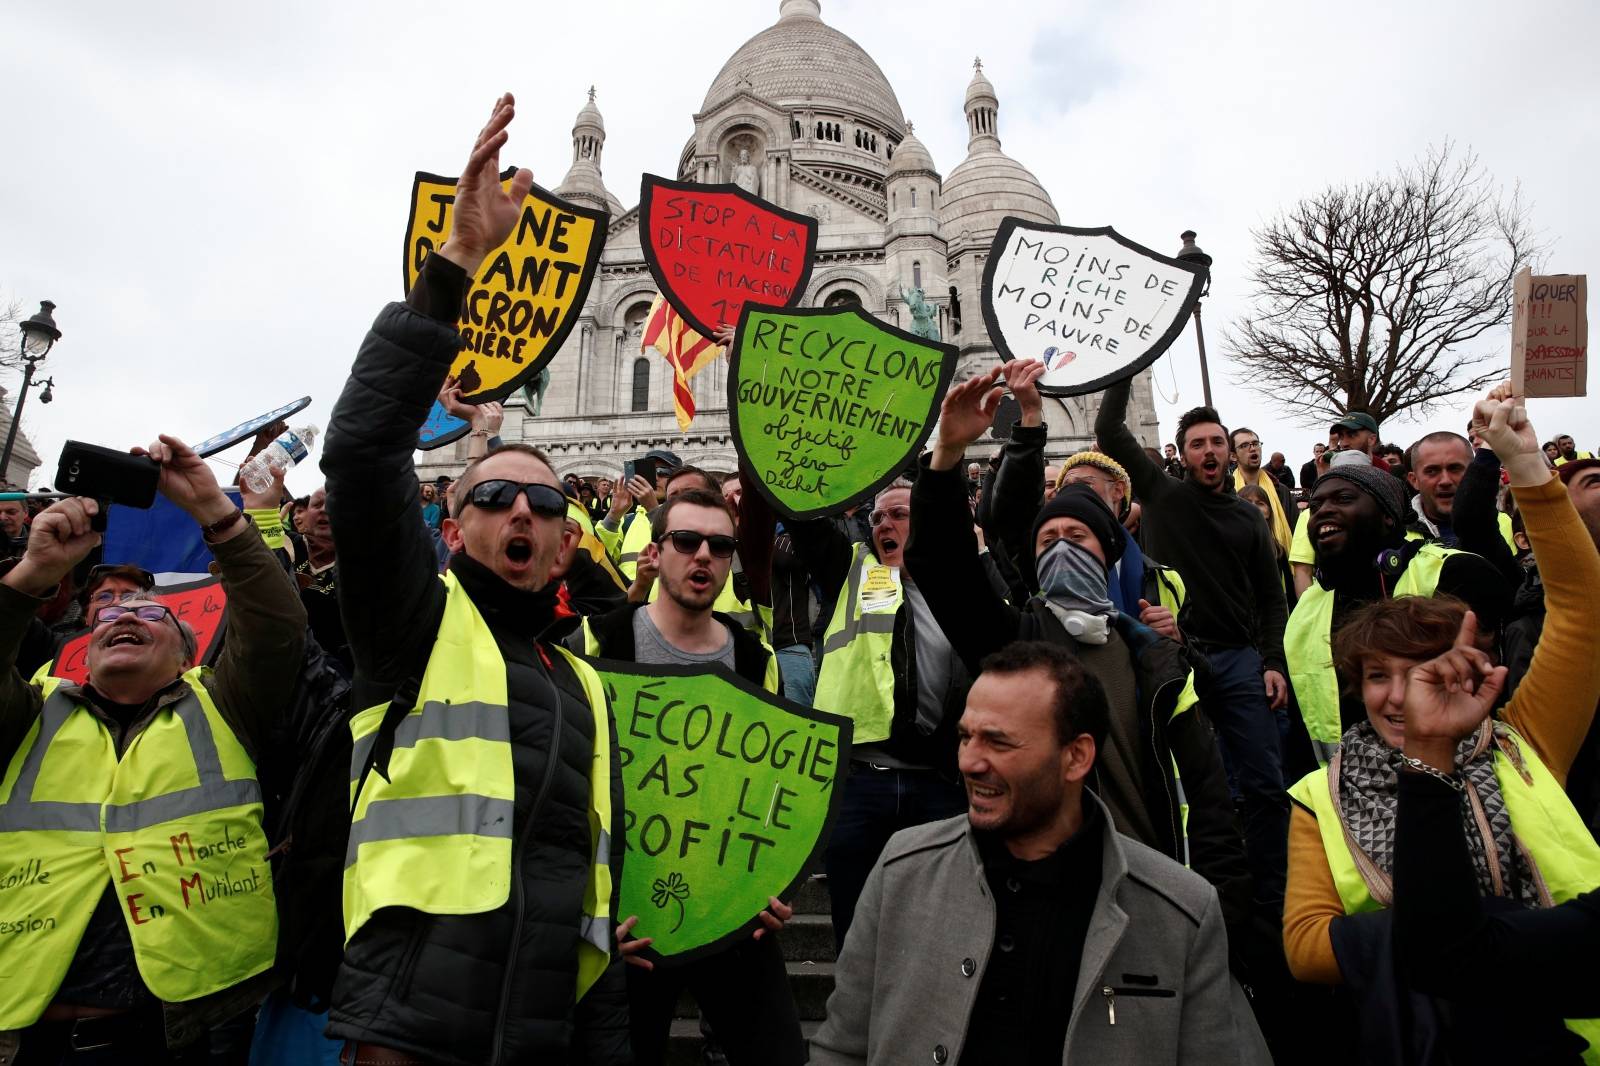 Protesters wearing yellow vests attend a demonstration in front of the Sacre-Coeur Basilica of Montmartre during the Act XIX (the 19th consecutive national protest on Saturday) of the "yellow vests" movement in Paris